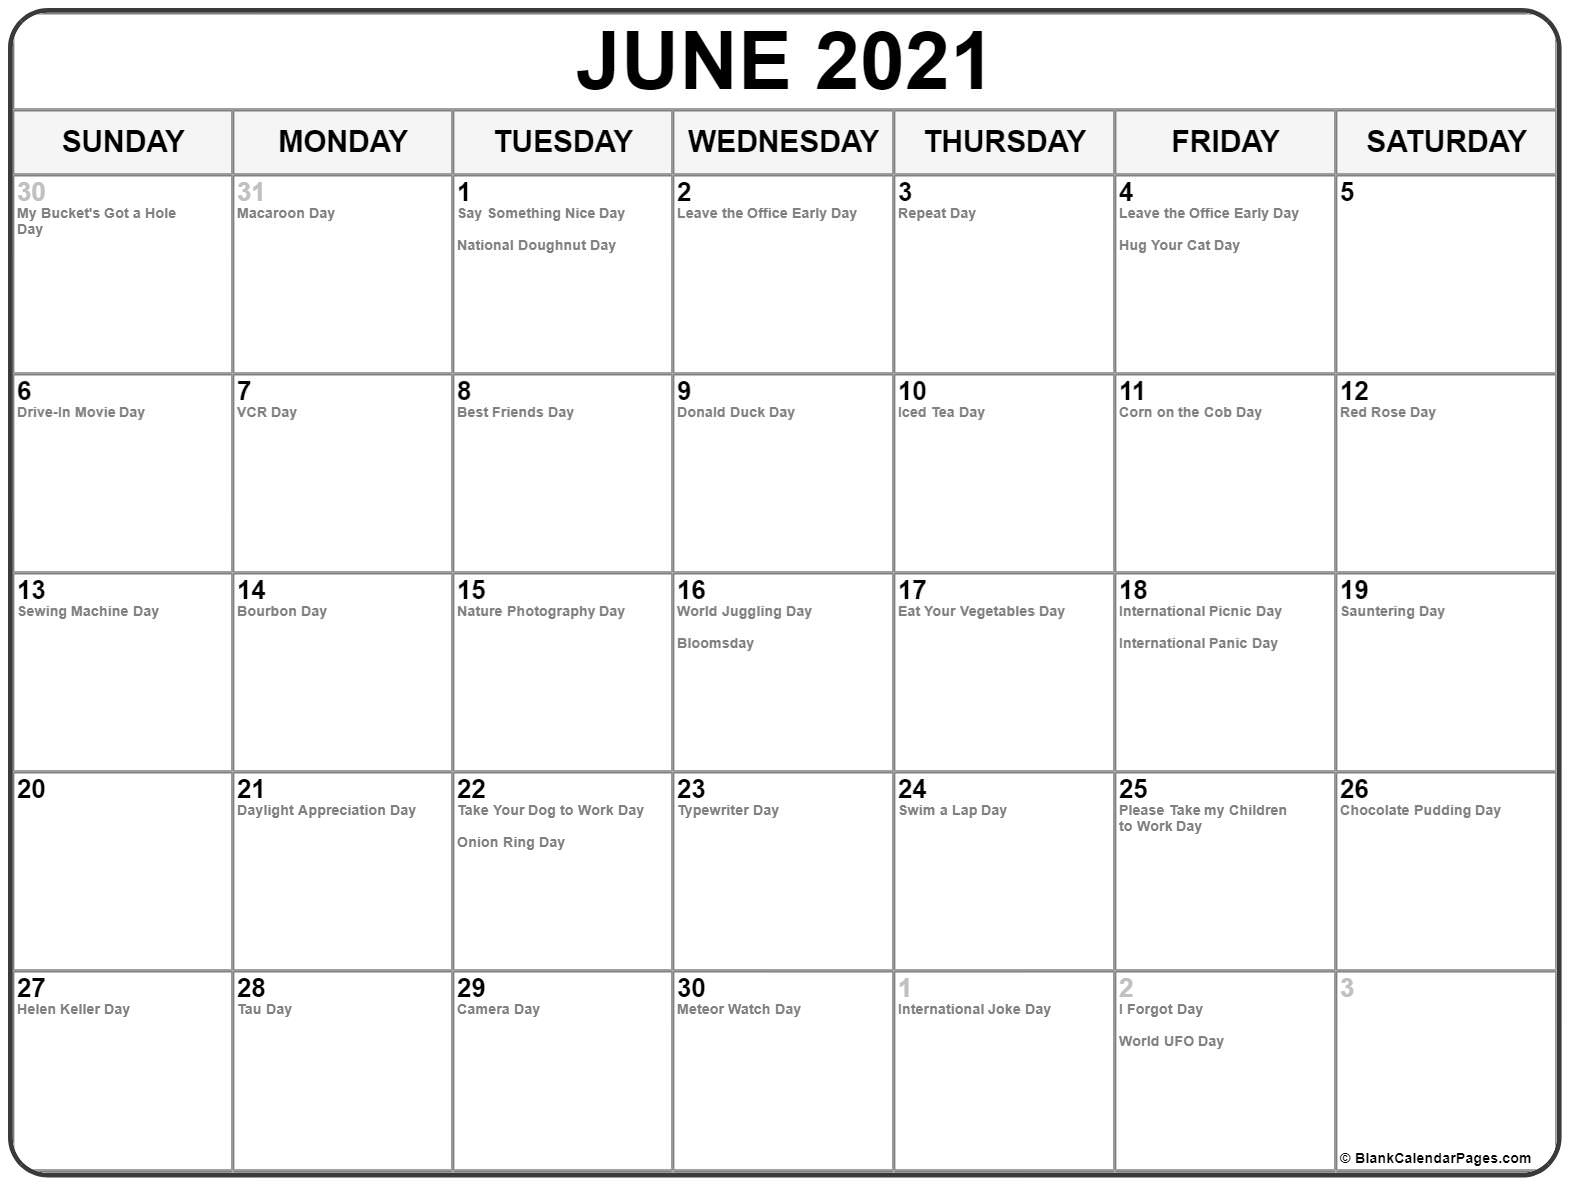 Collection Of June 2021 Calendars With Holidays June 2021 Calendar With Holidays Usa